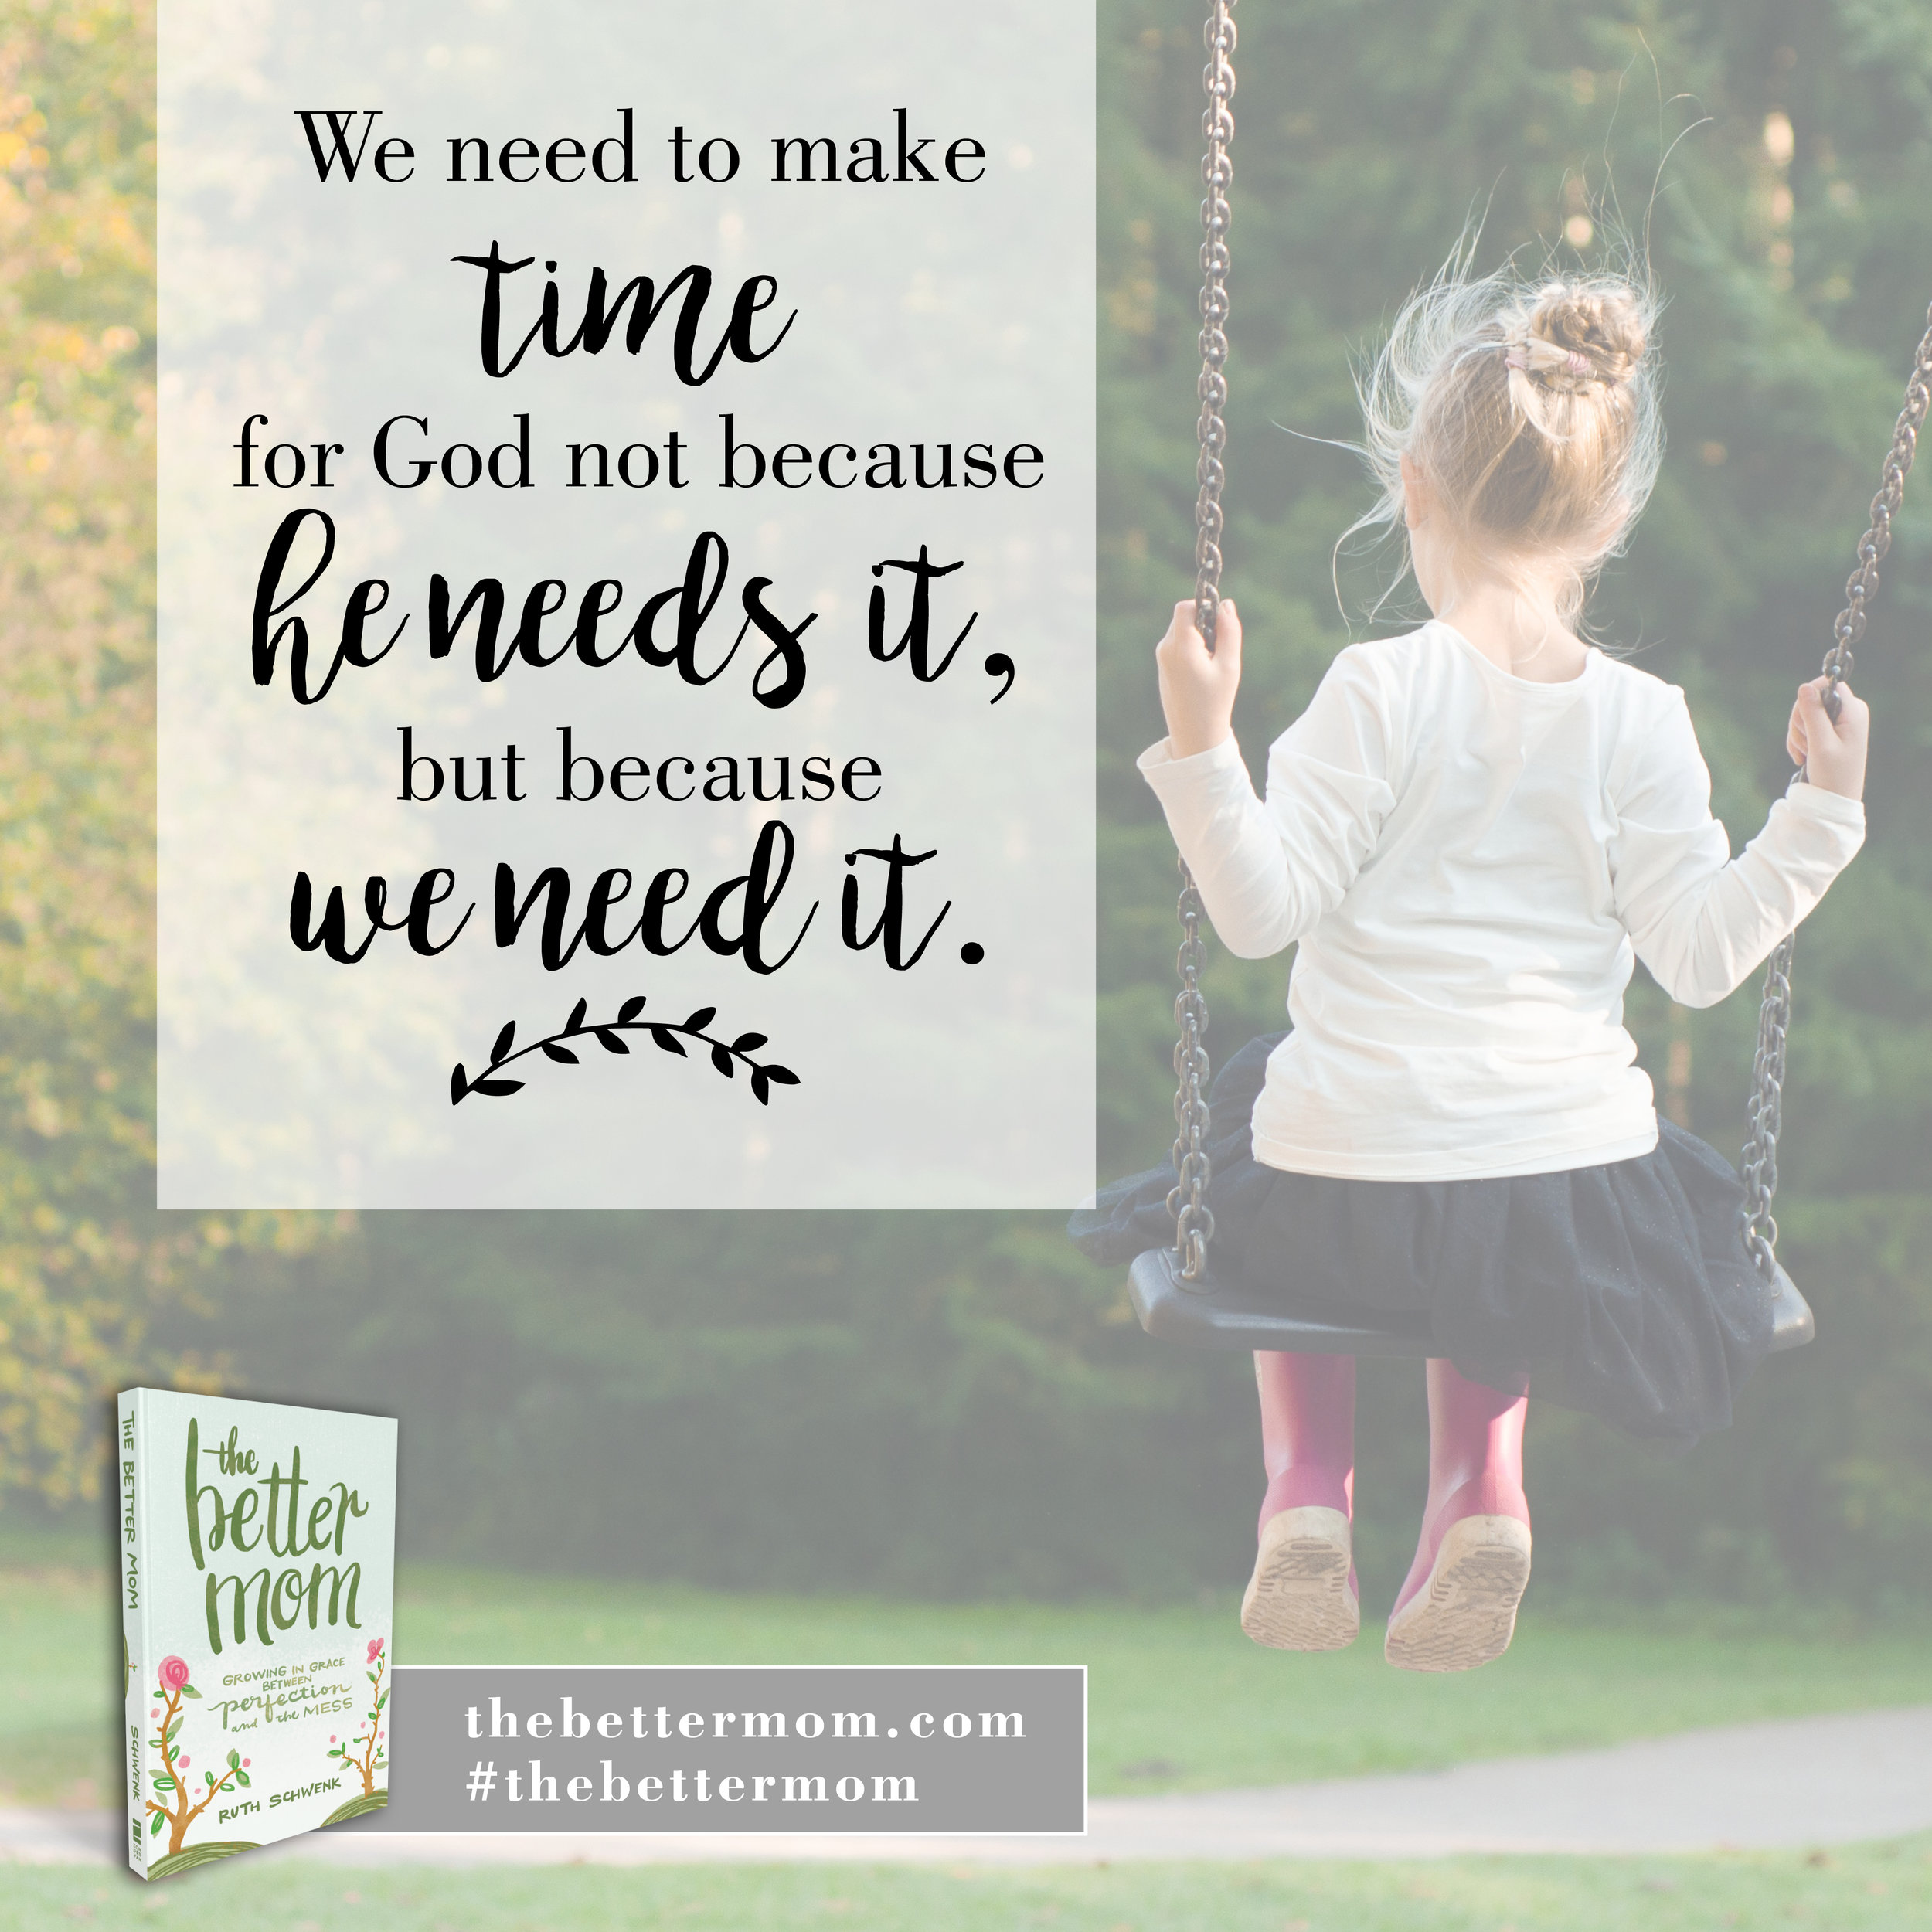  Moms, what our hearts need most is time carved out for God. He is shaping us through our experiences and we need time to hear from him and talk to him about who we are becoming. Join me and thousands of other moms today, as we learn to grow in grace